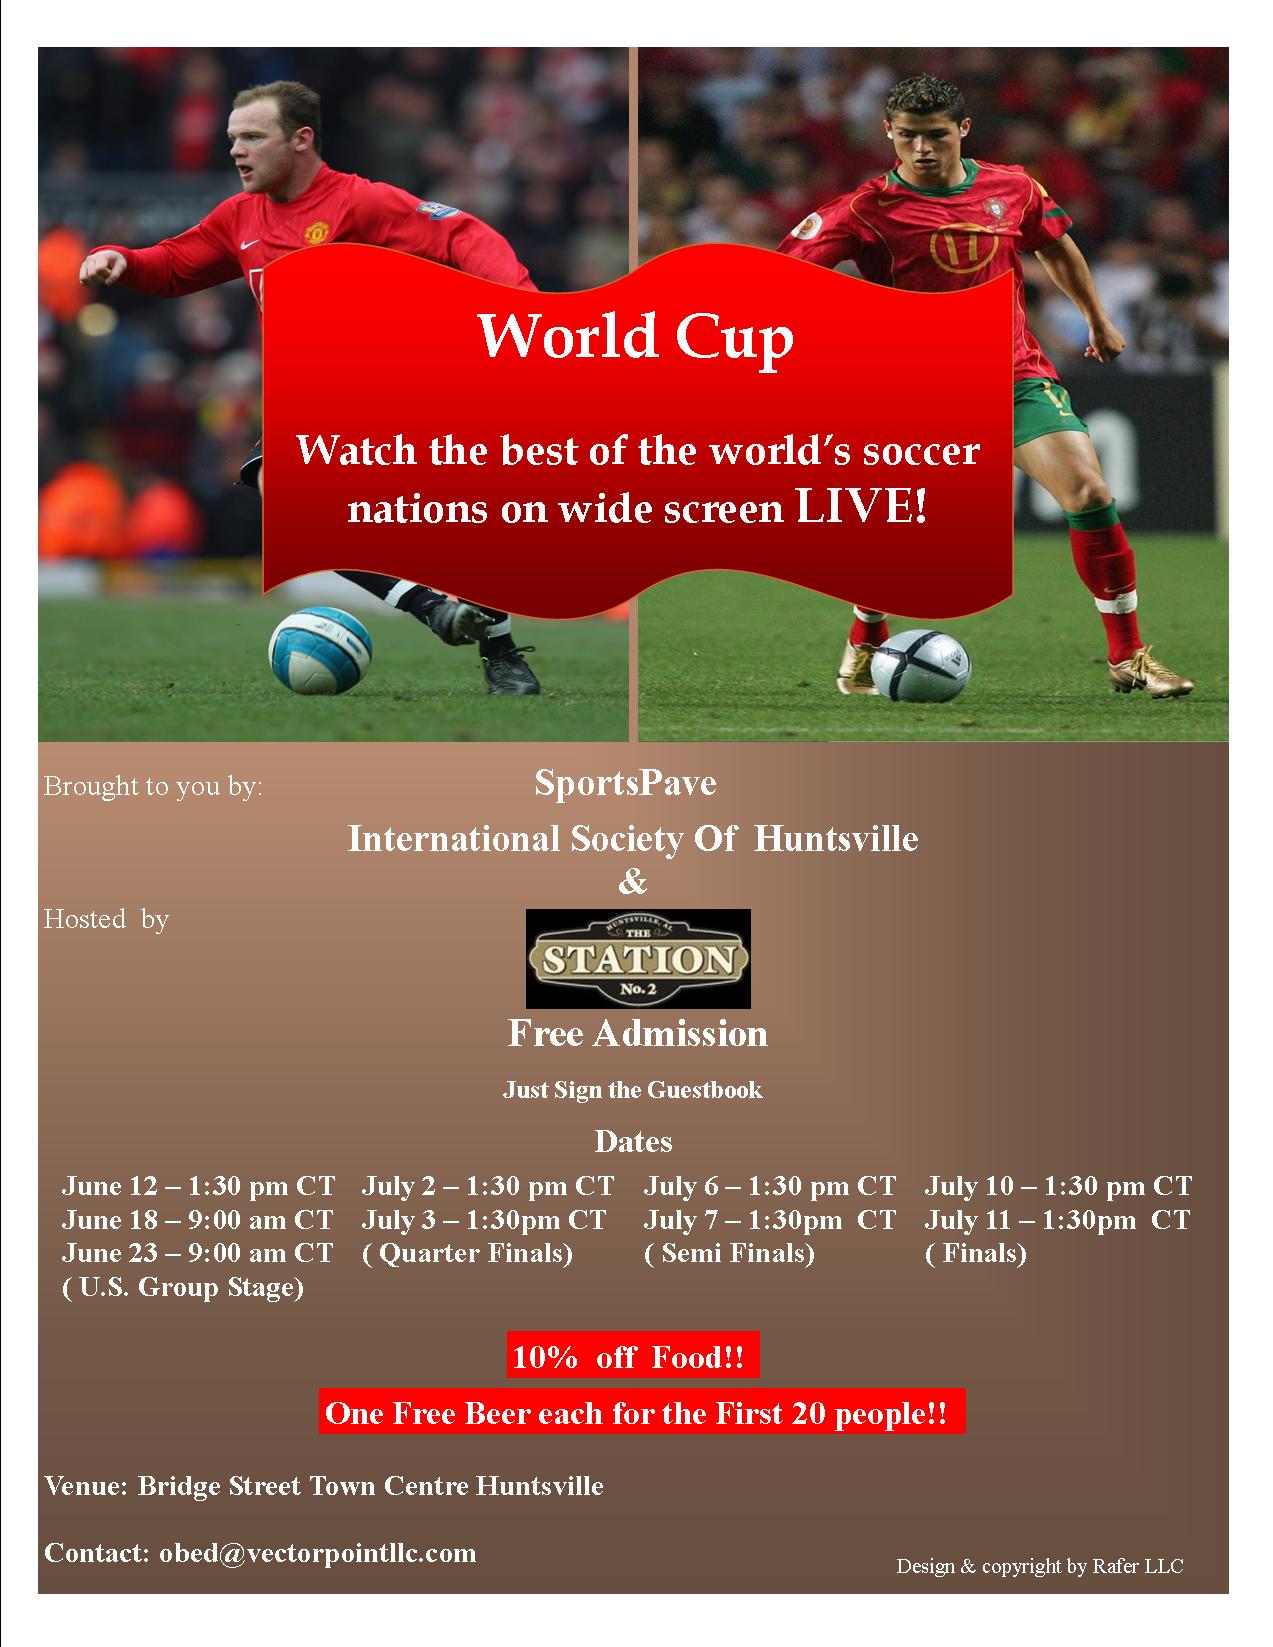 World Cup Event